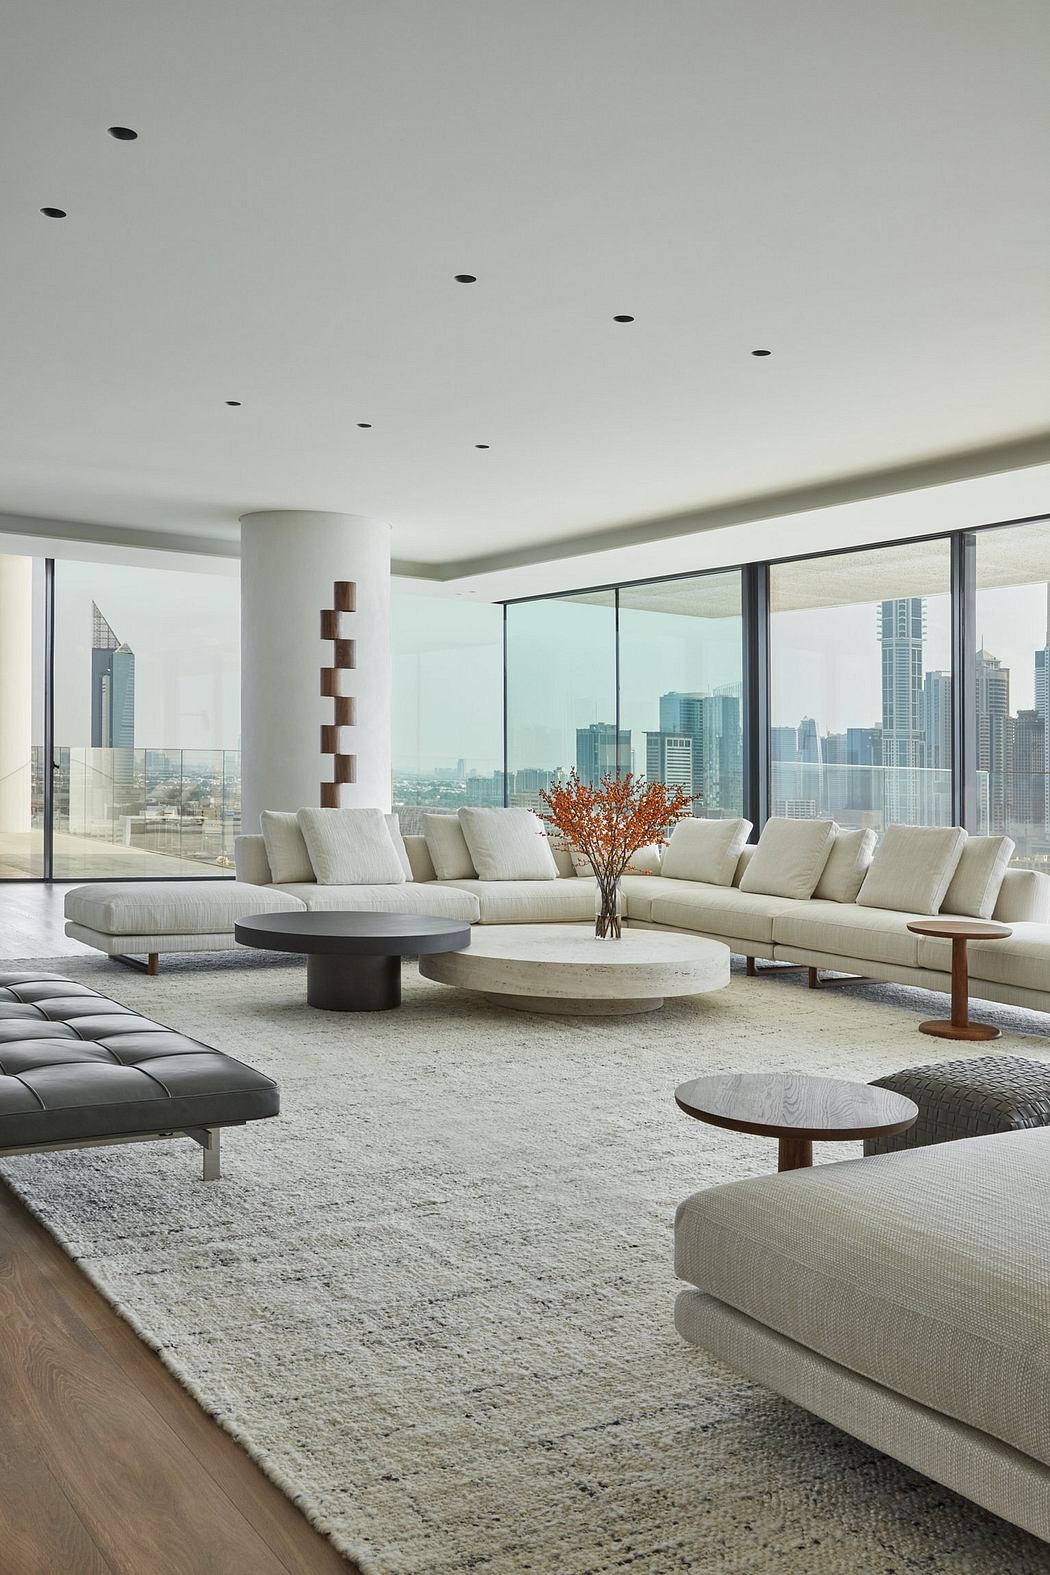 Spacious modern living room with sleek furniture, floor-to-ceiling windows, and a cityscape view.